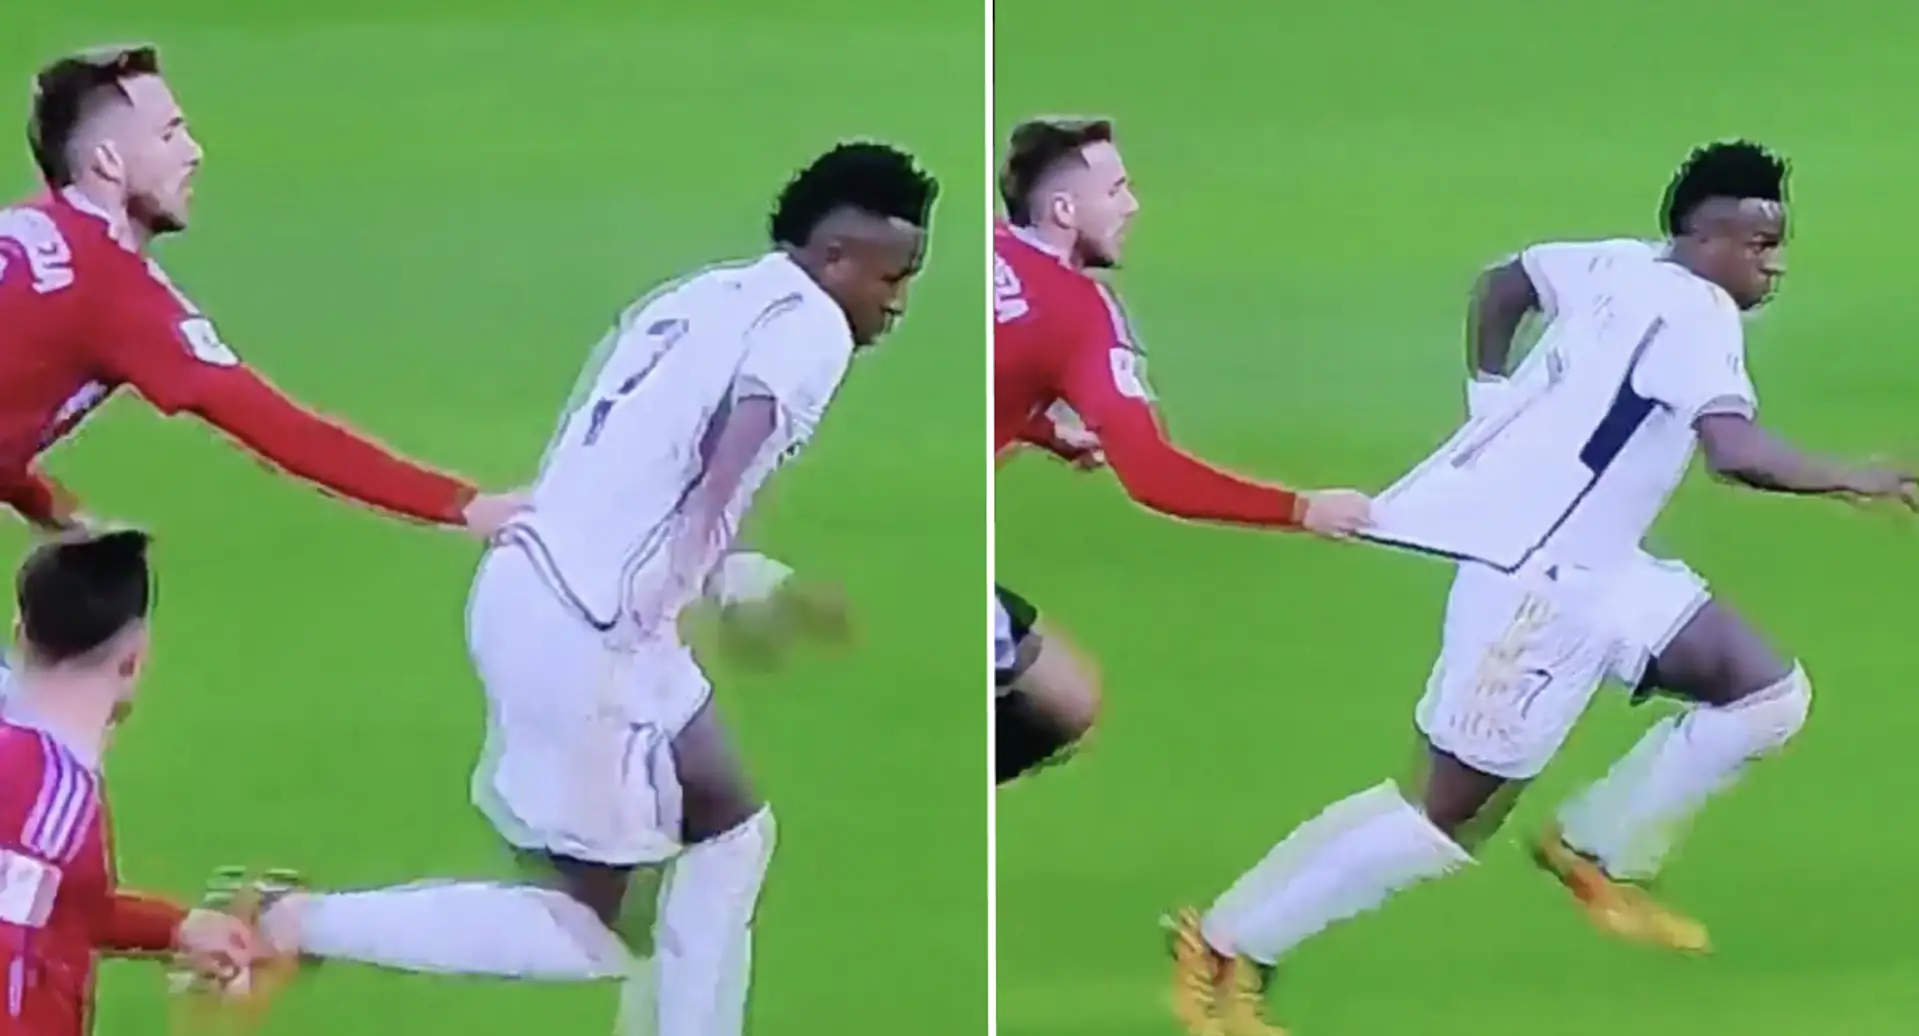 Vinicius' fiery reaction to Mingueza's foul nearly saw him getting a RED